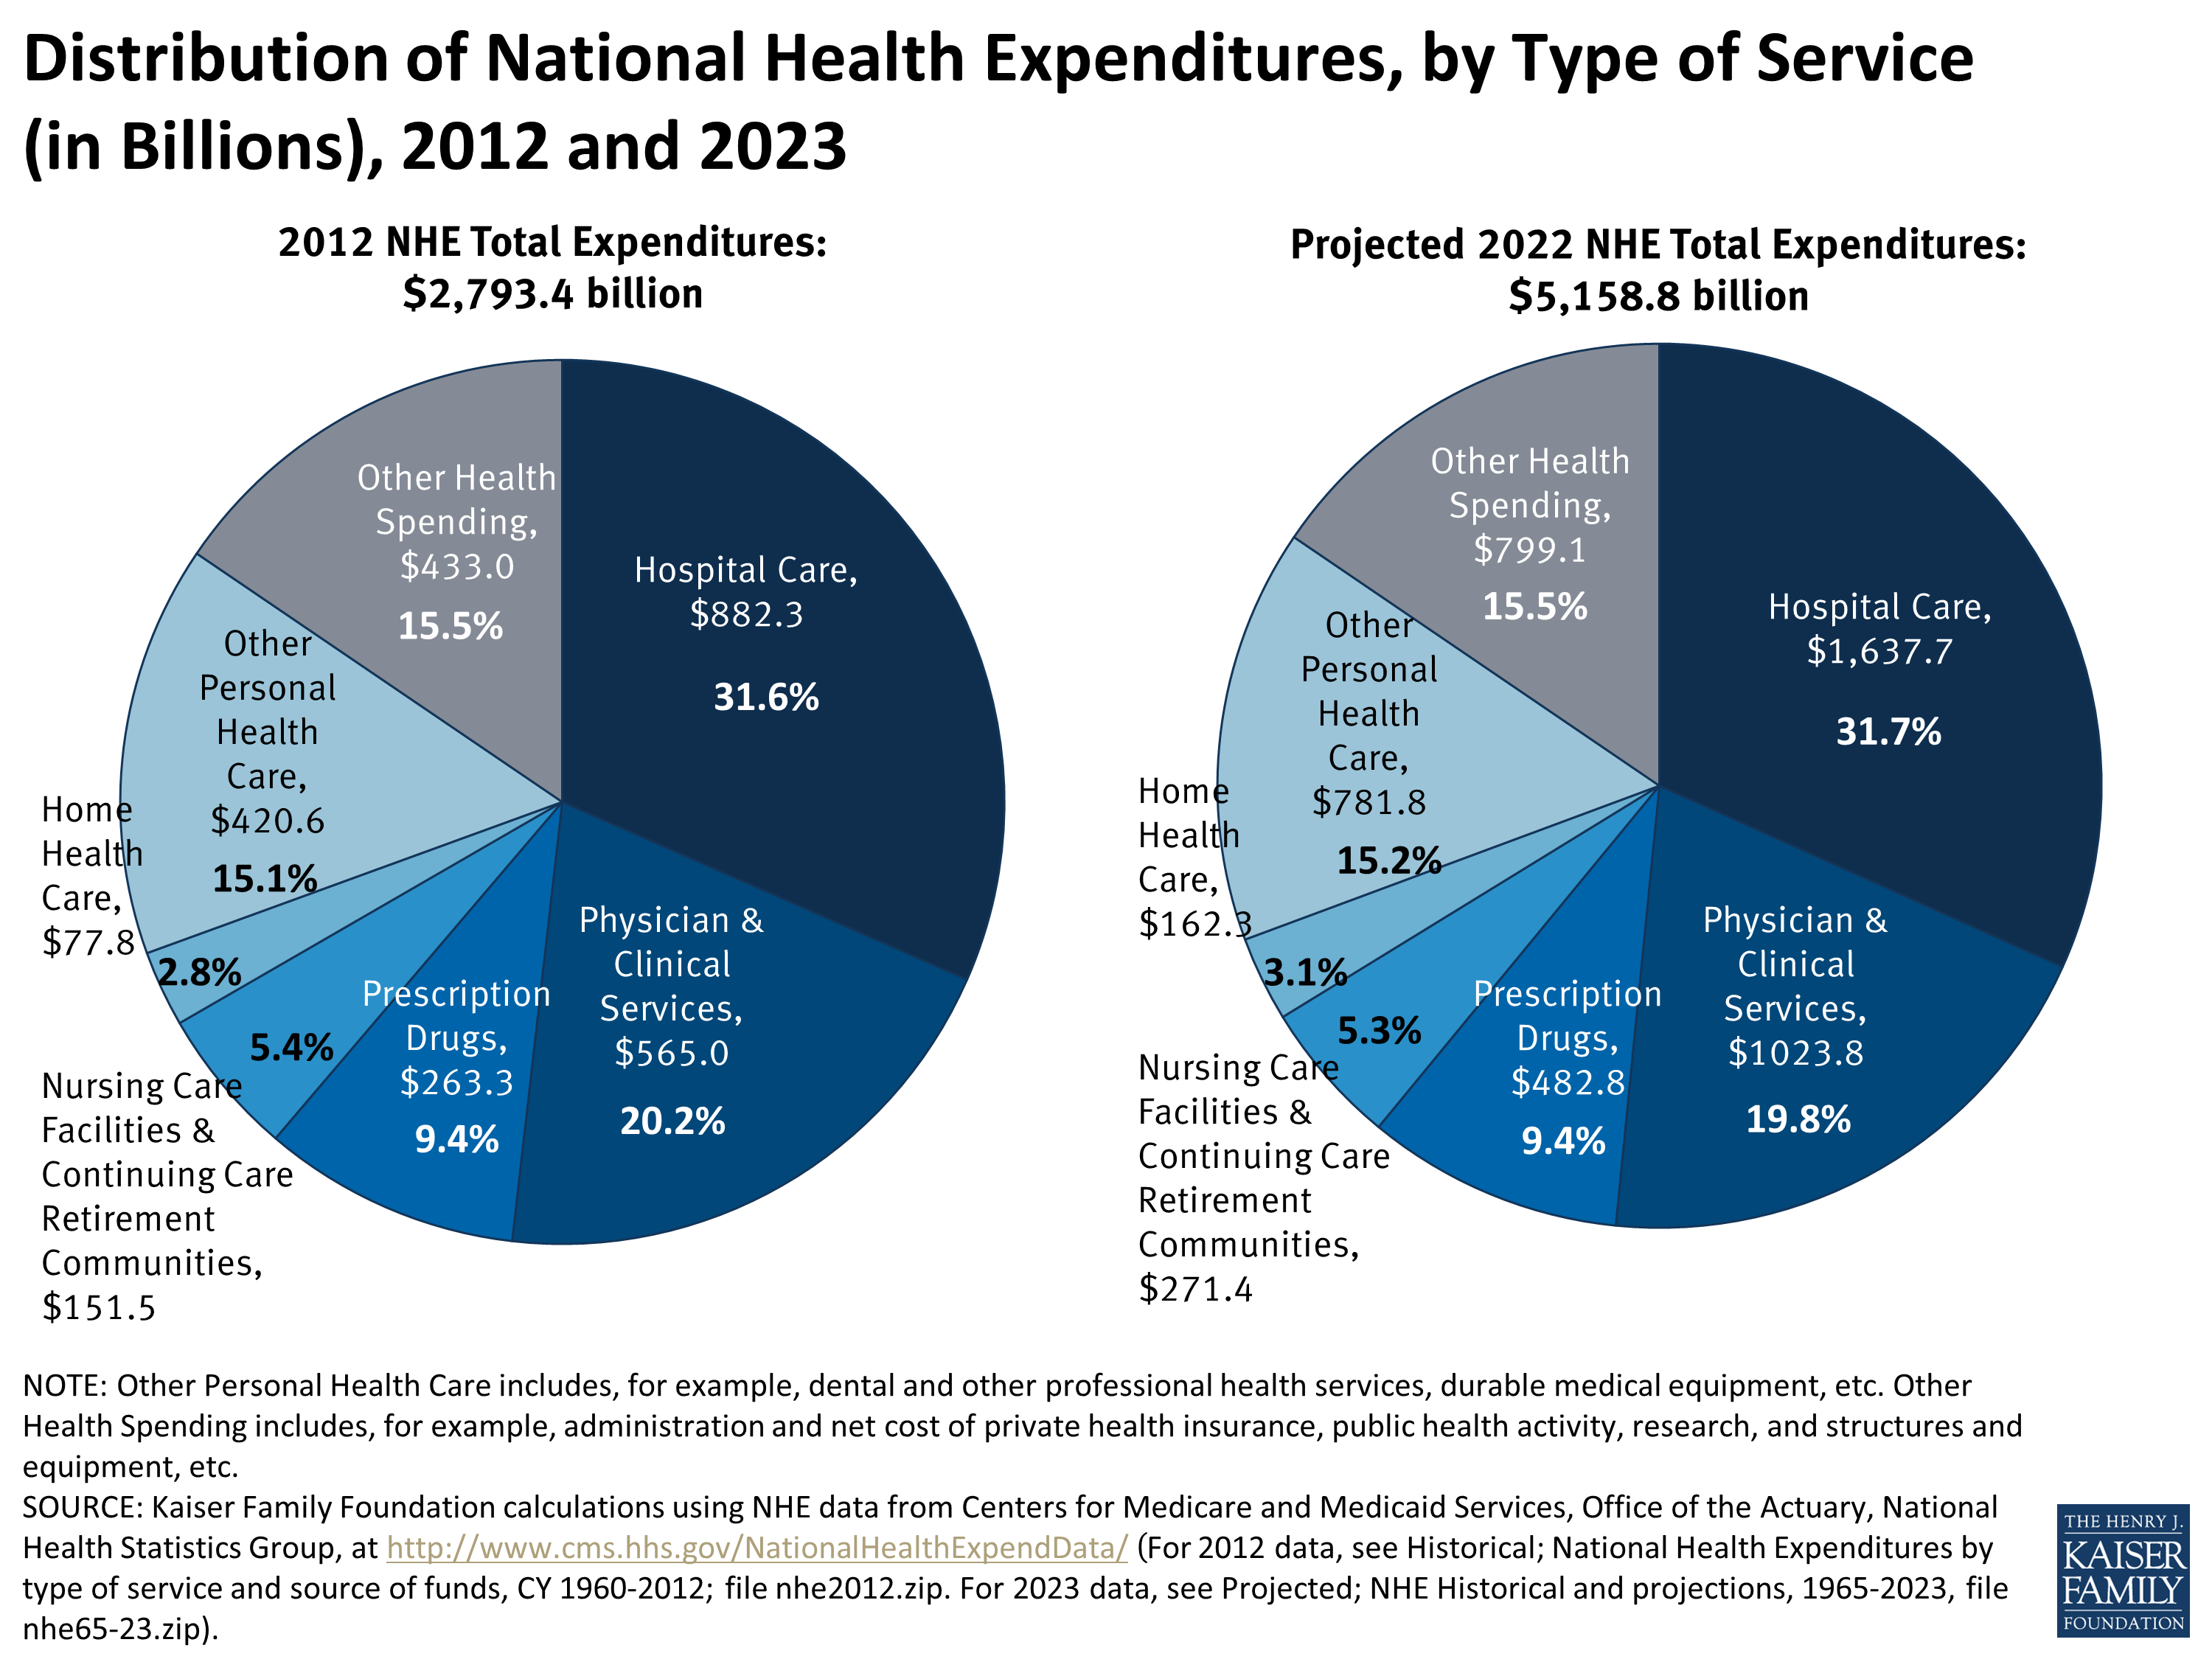 Distribution of National Health Expenditures, by Type of Service (in Billions), 2012 and 2023 KFF